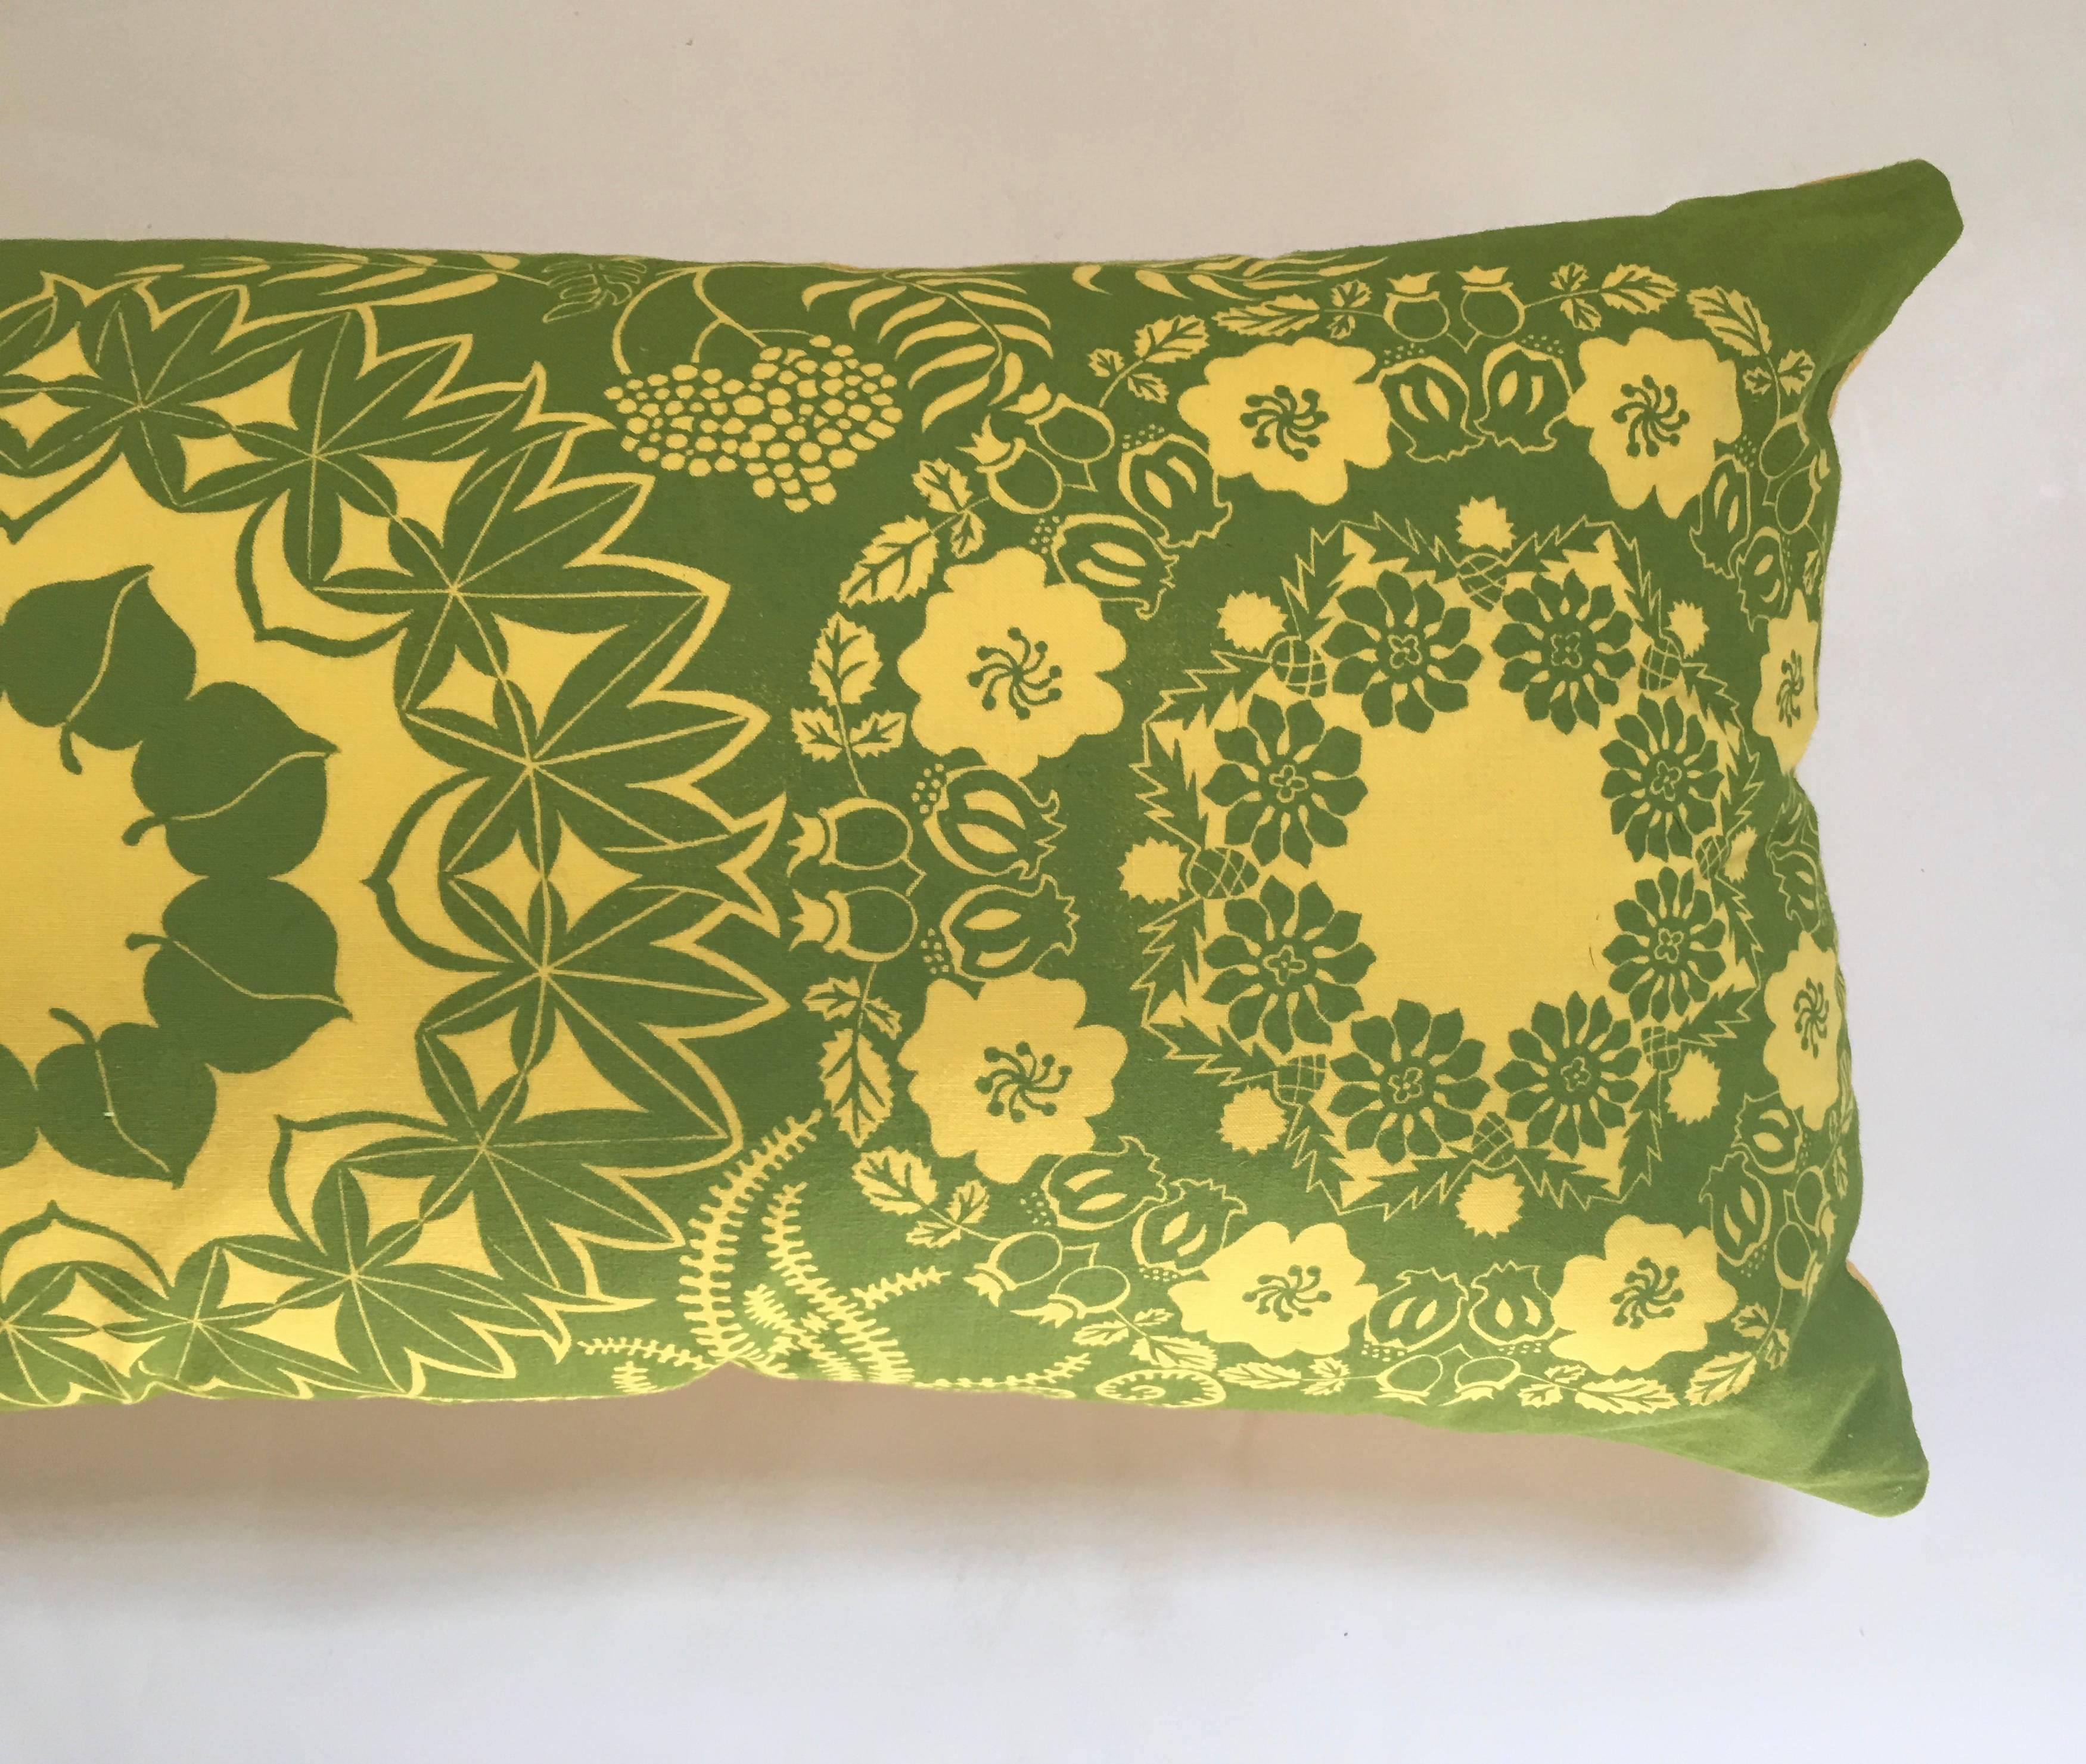 Mid-Century Modern Summer Wreaths Yellow and Green Folly Cove Designers Hand Printed Pillow